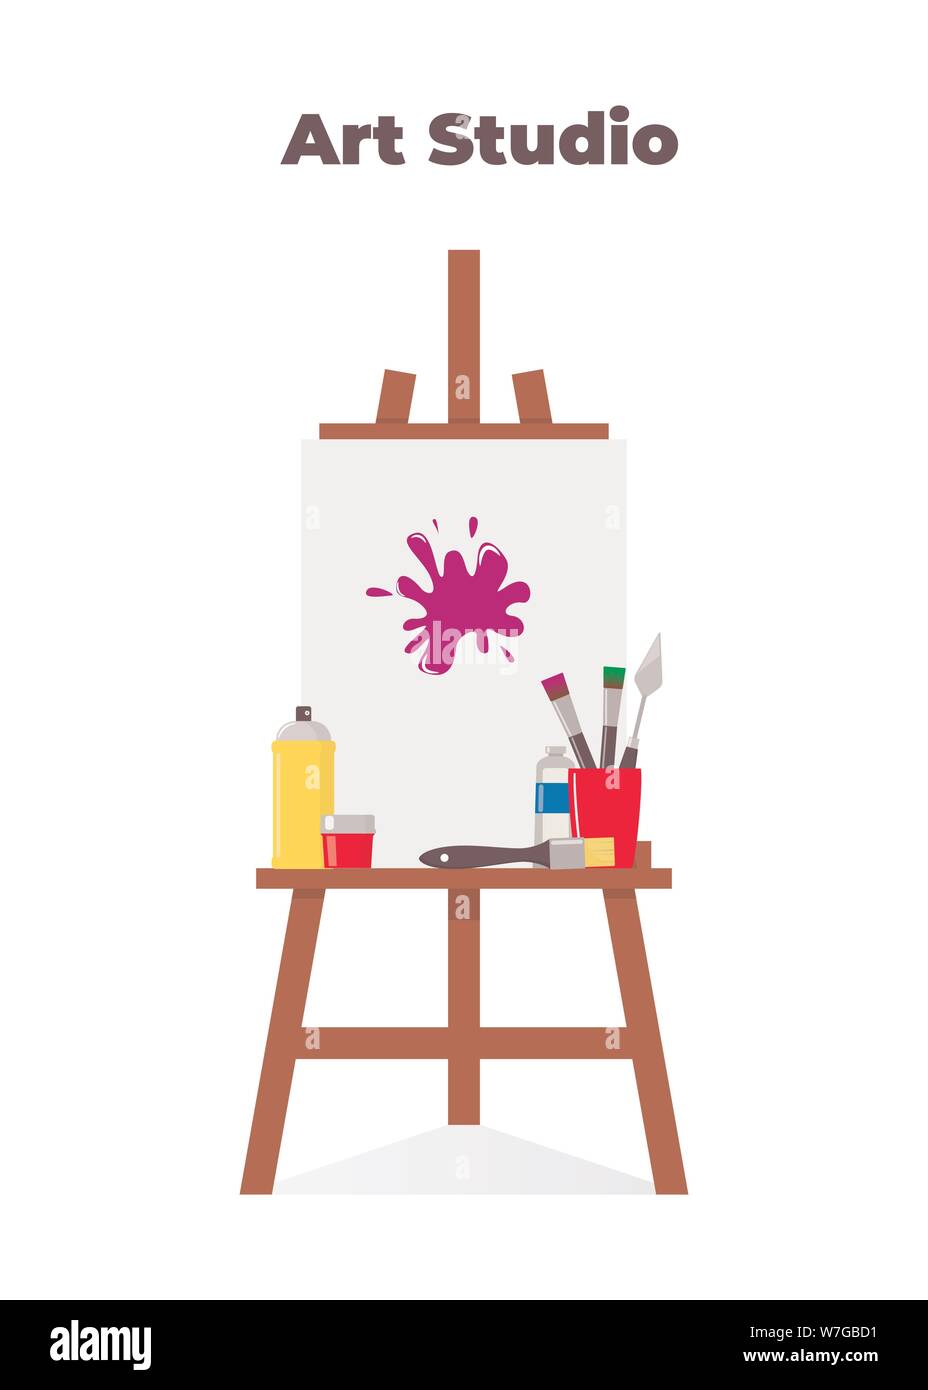 https://c8.alamy.com/comp/W7GBD1/painting-tools-elements-in-flat-style-set-art-supplies-easel-with-canvas-paint-tubes-palette-knife-brushes-vector-illustration-W7GBD1.jpg